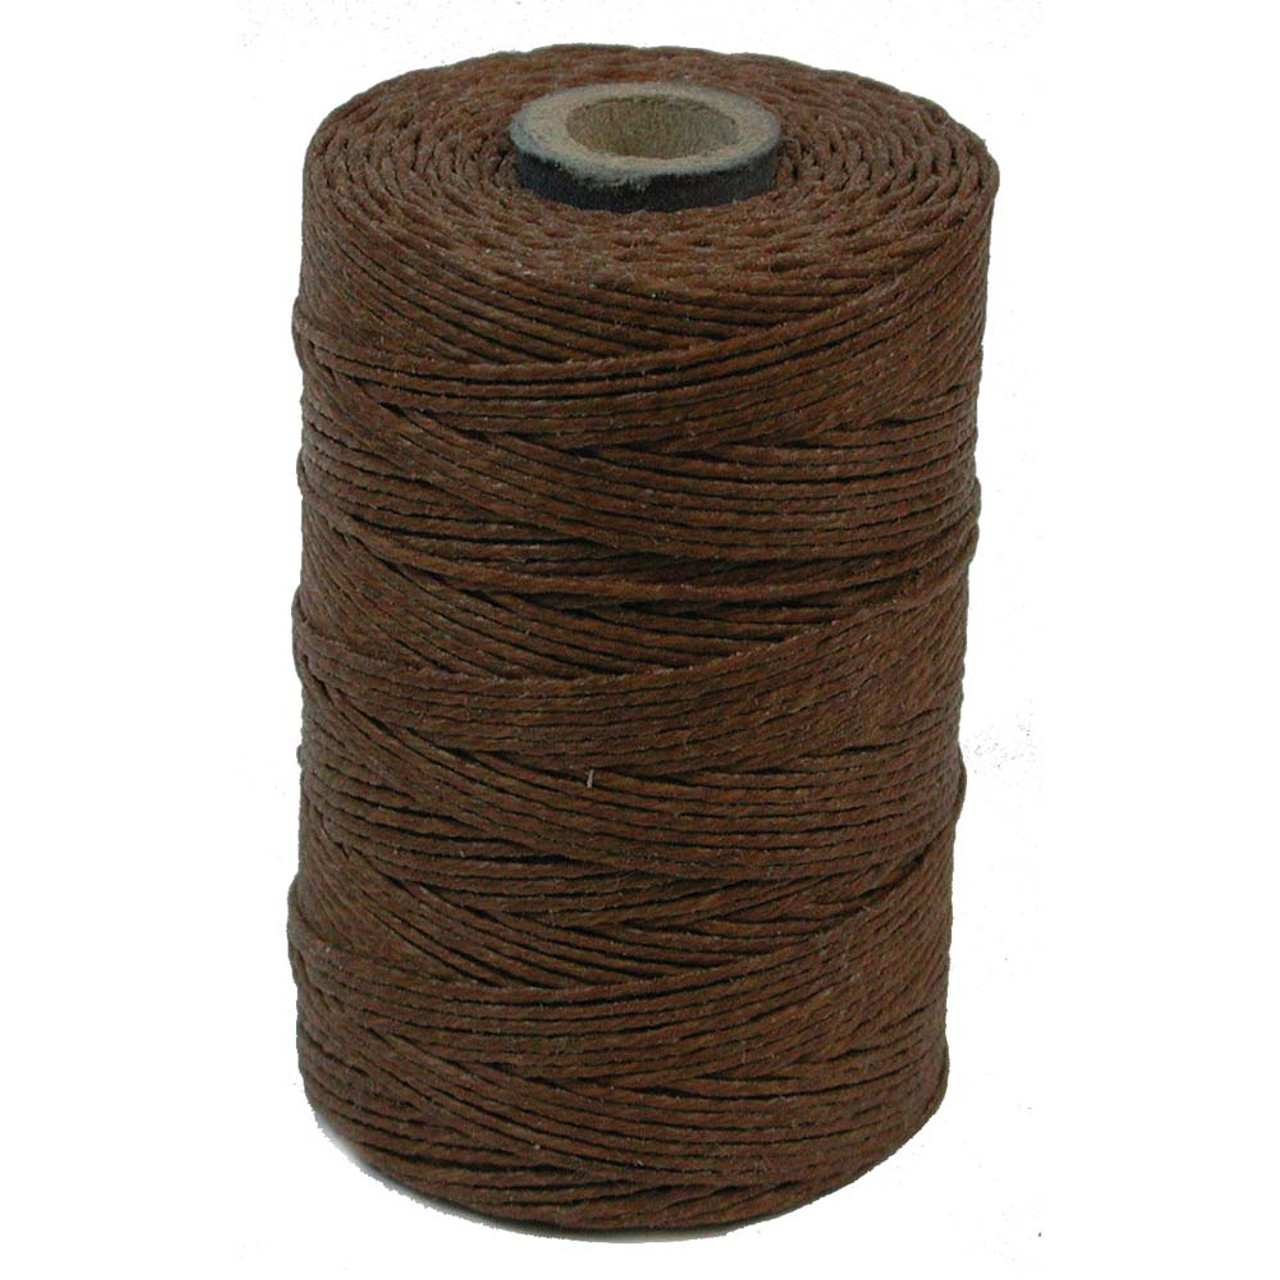 10 Yards Crawford Waxed Linen Thread, 4 Ply, Choose a Color 